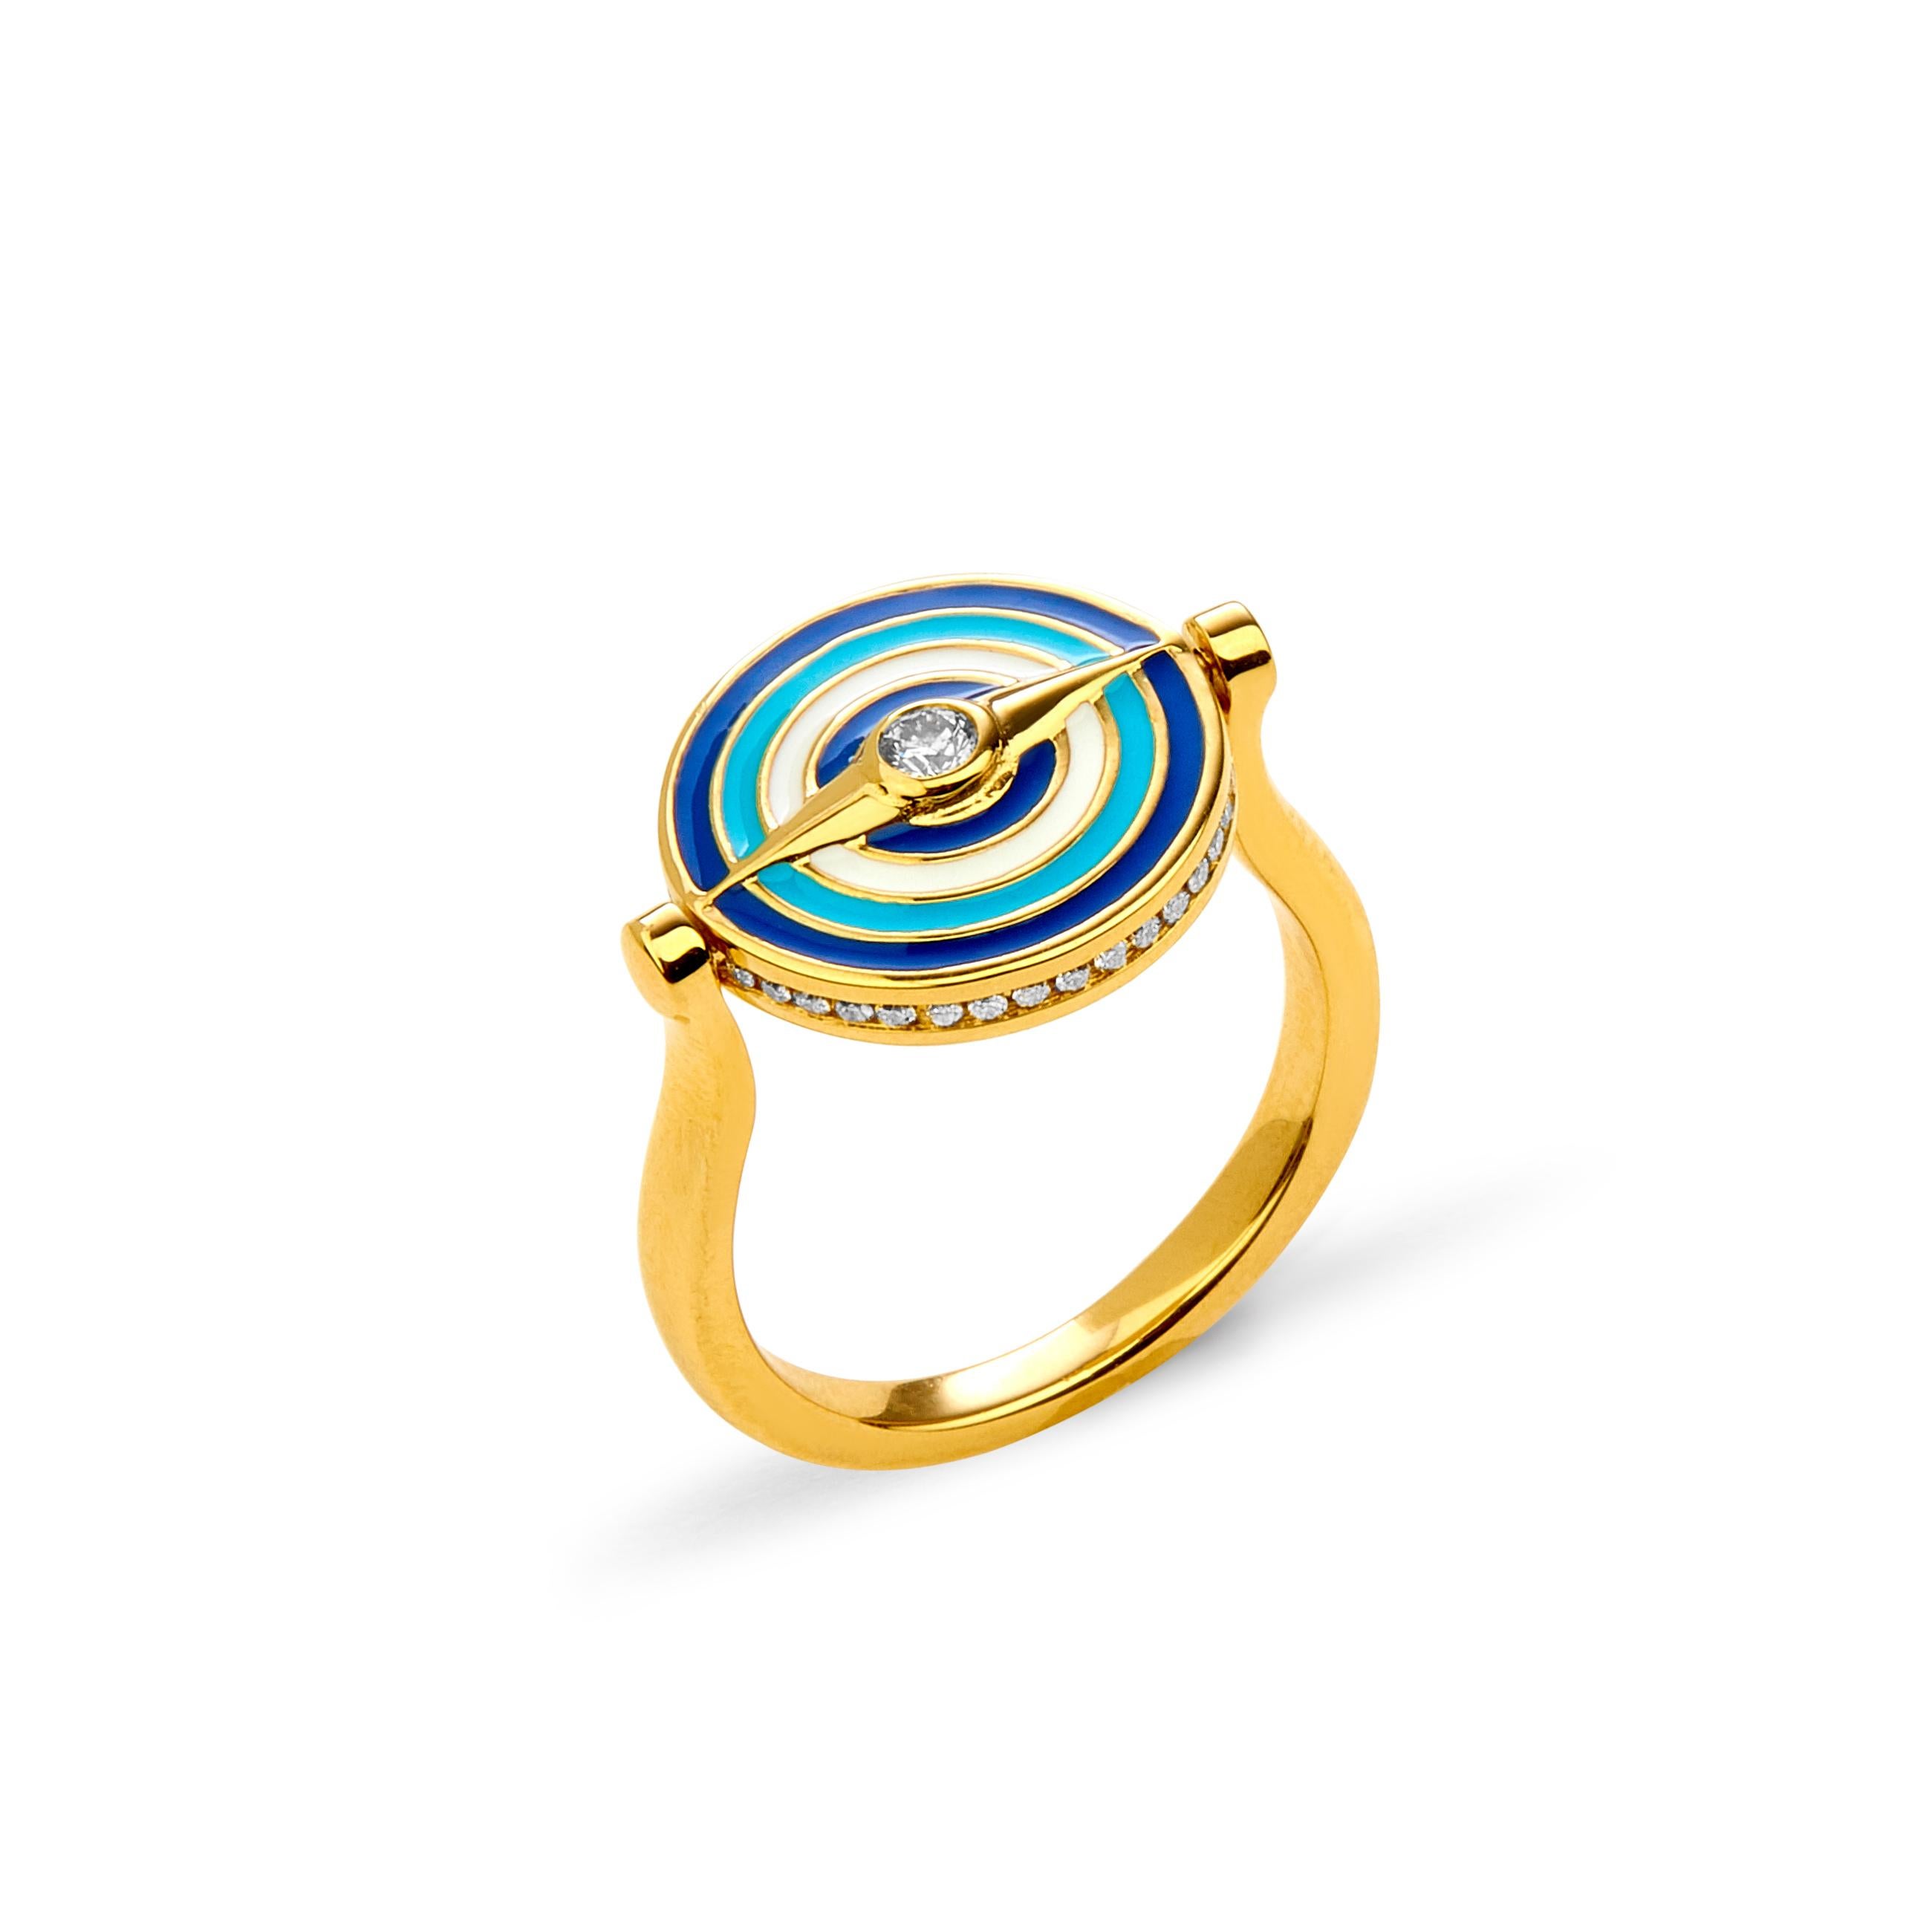 Created in 18kyg
Reversible evil eye ring
Azure blue, turquoise blue & white enamel
Diamonds 0.60 ct approx
Swivel mechanism to turn the evil eye versions
Ring size US 6.5
Limited edition

This sublime 18kyg Ring, with its exquisite reversible evil